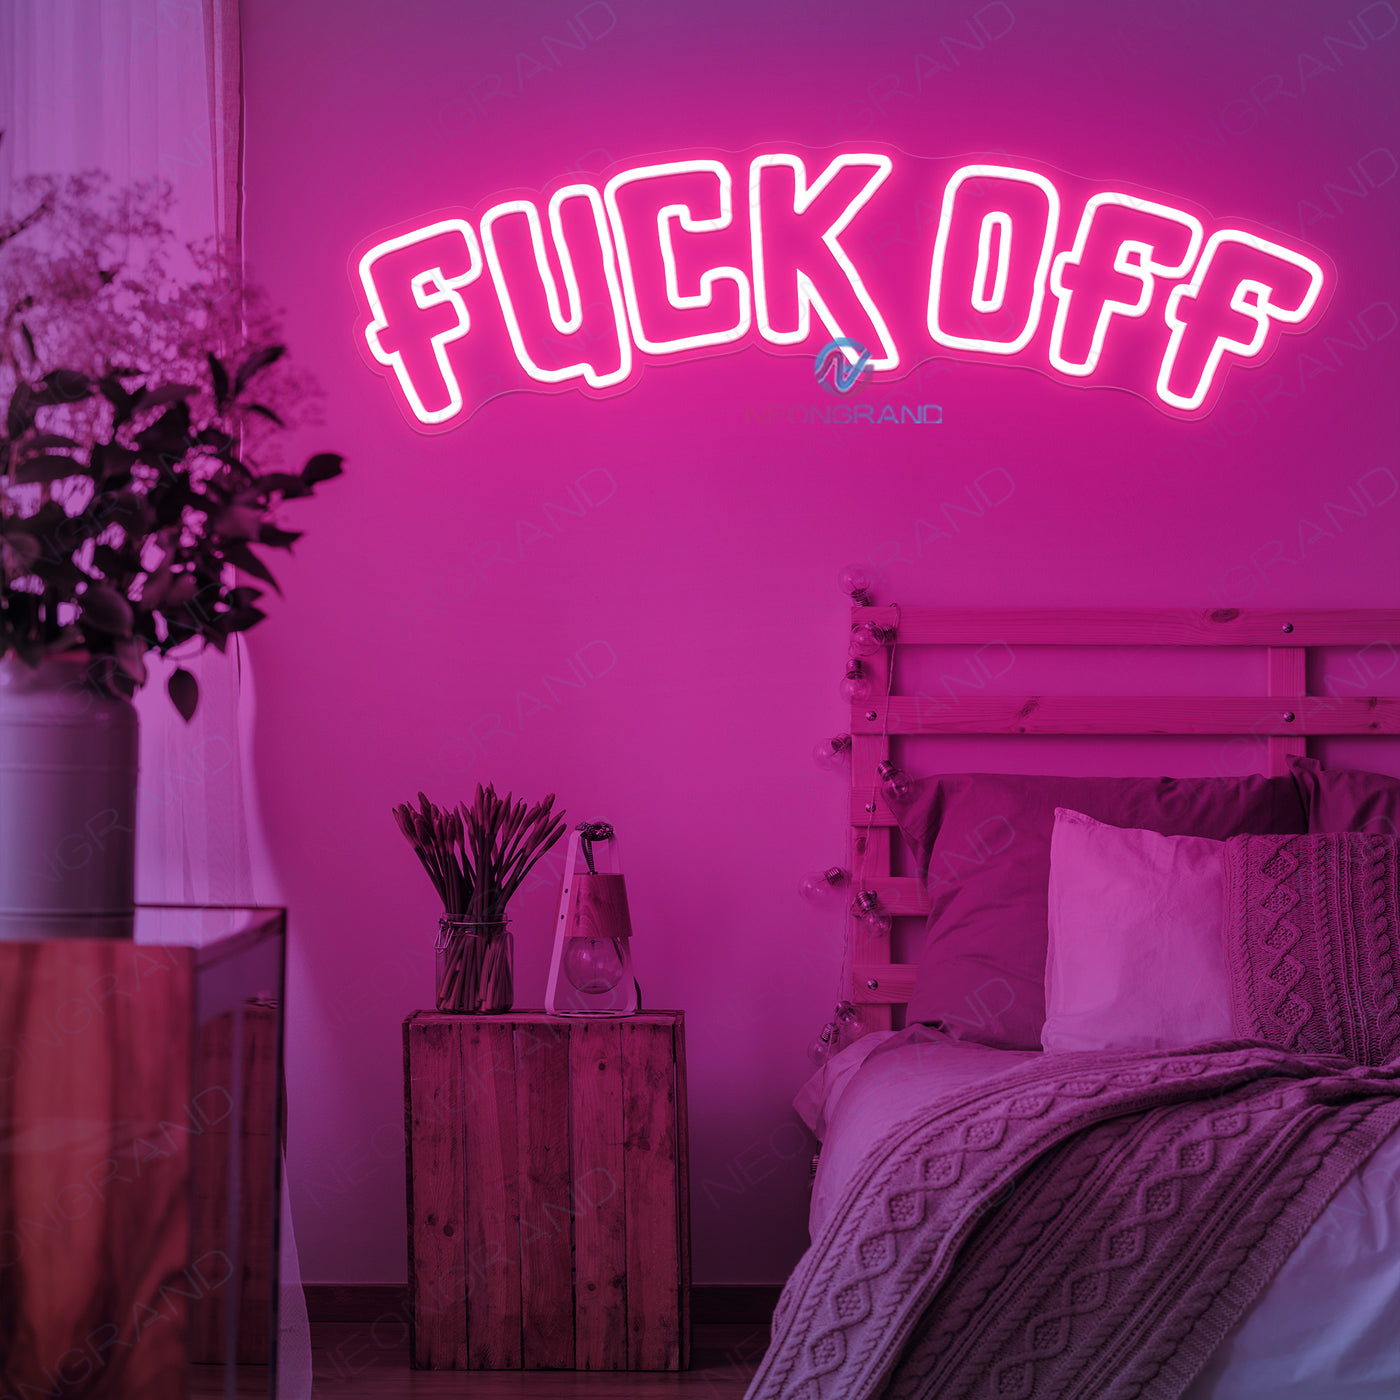 Fuck Off Neon Sign Led Light Man Cave Neon Sign deep pink